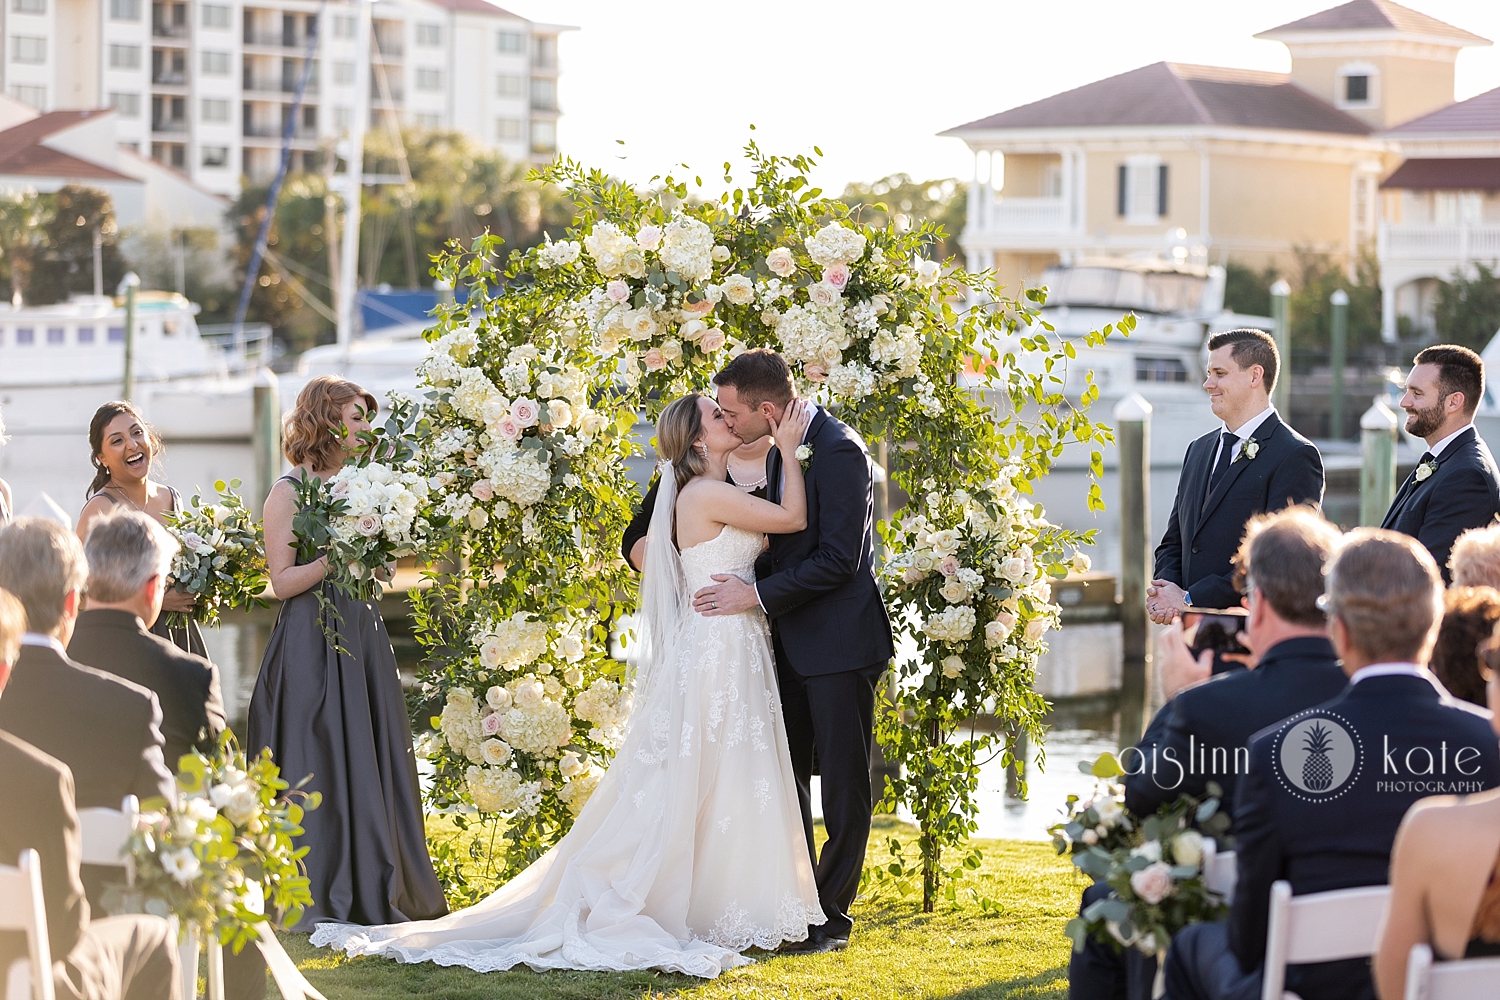 Wedding Couple First Kiss at Ceremony on Waterfront Lawn at Palafox Wharf Waterfront in Pensacola FL then has Reception next door at Venue with Deck and Dock